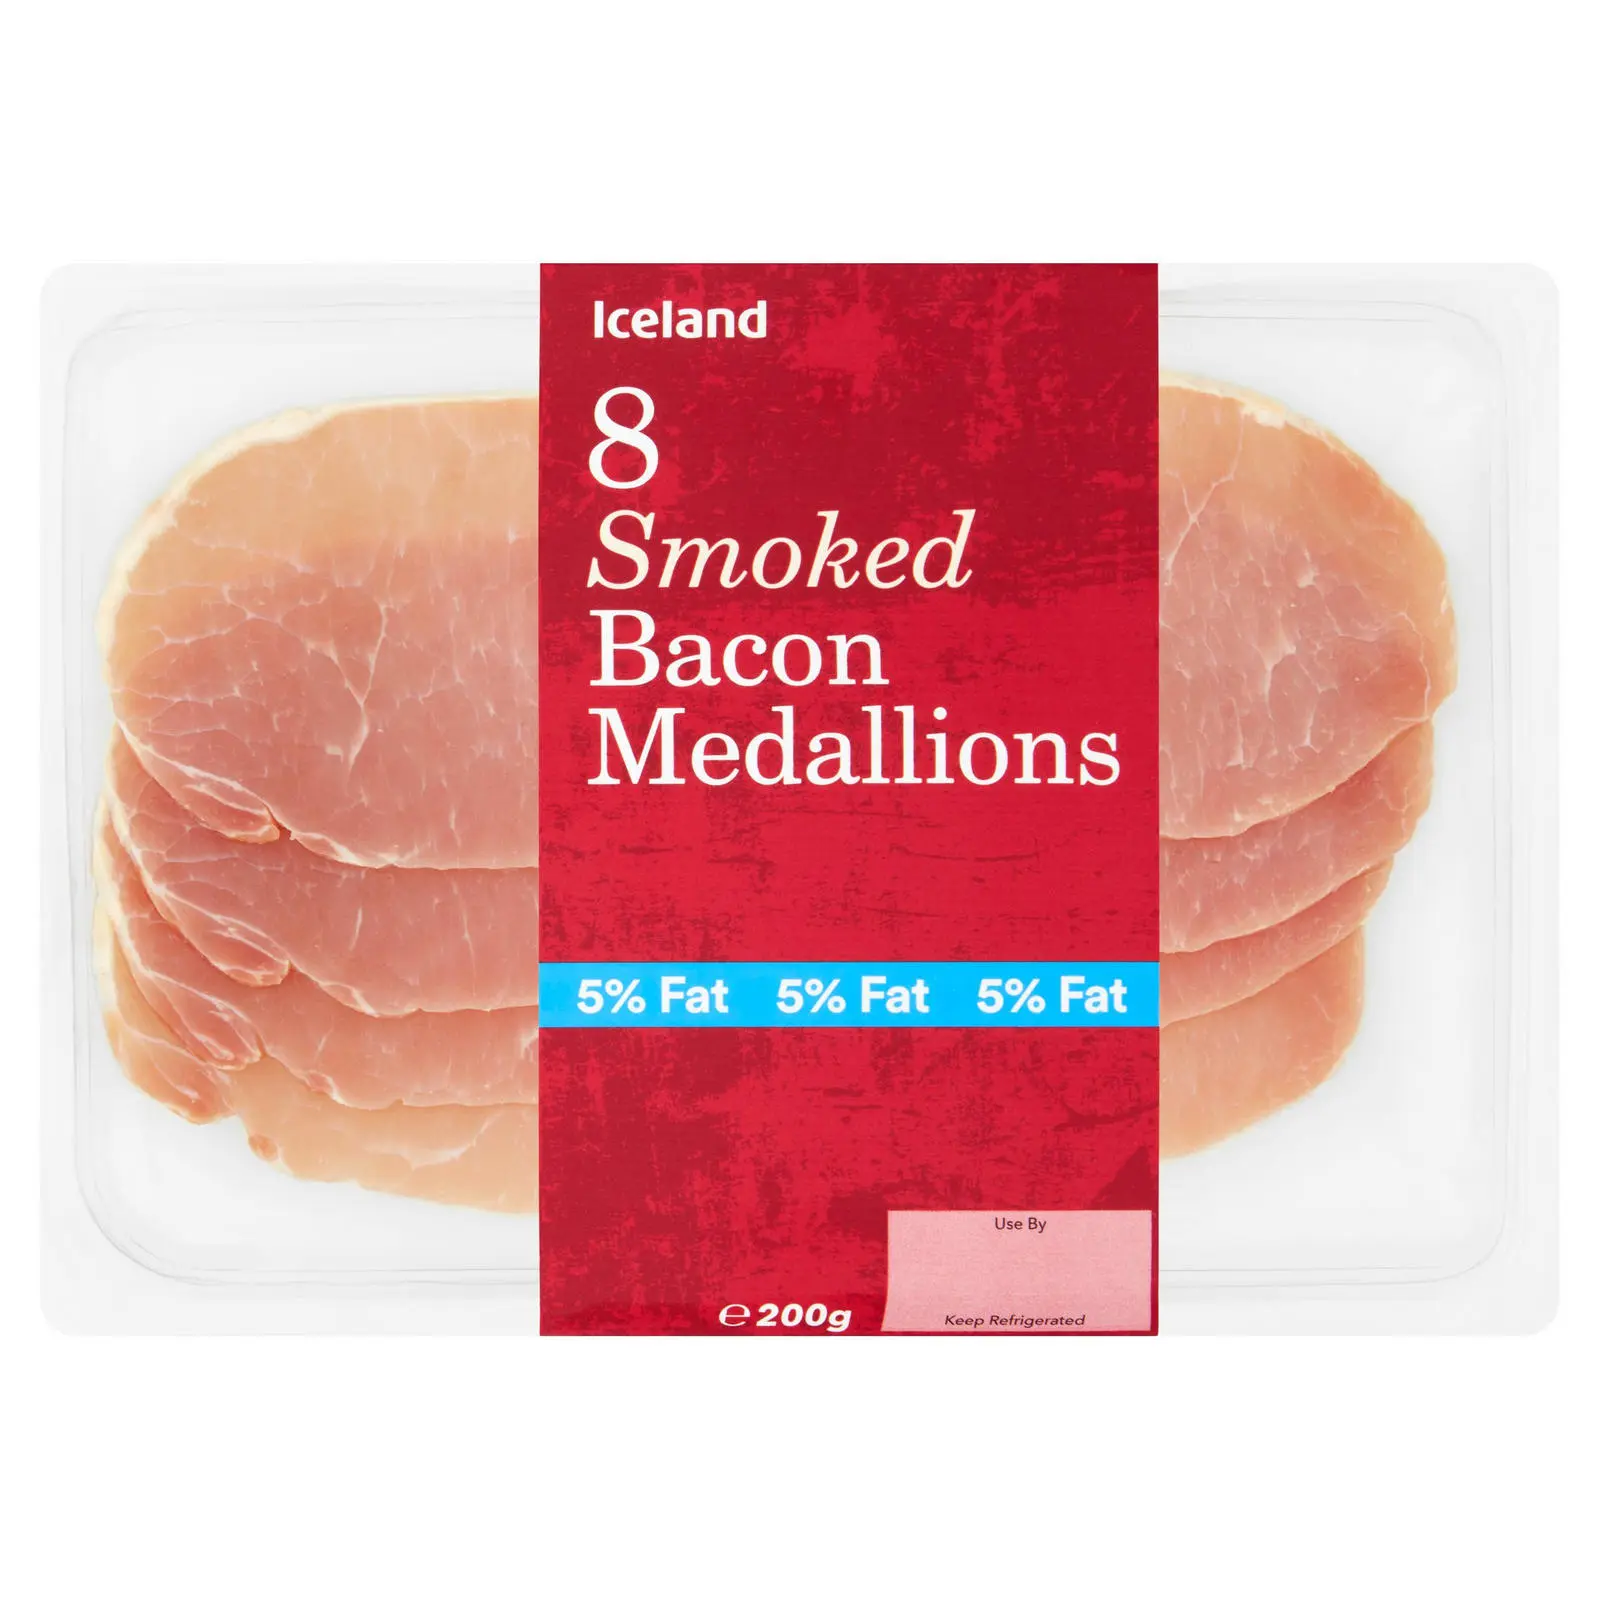 calories in smoked bacon medallions - How many calories are in 2 smoked bacon medallions